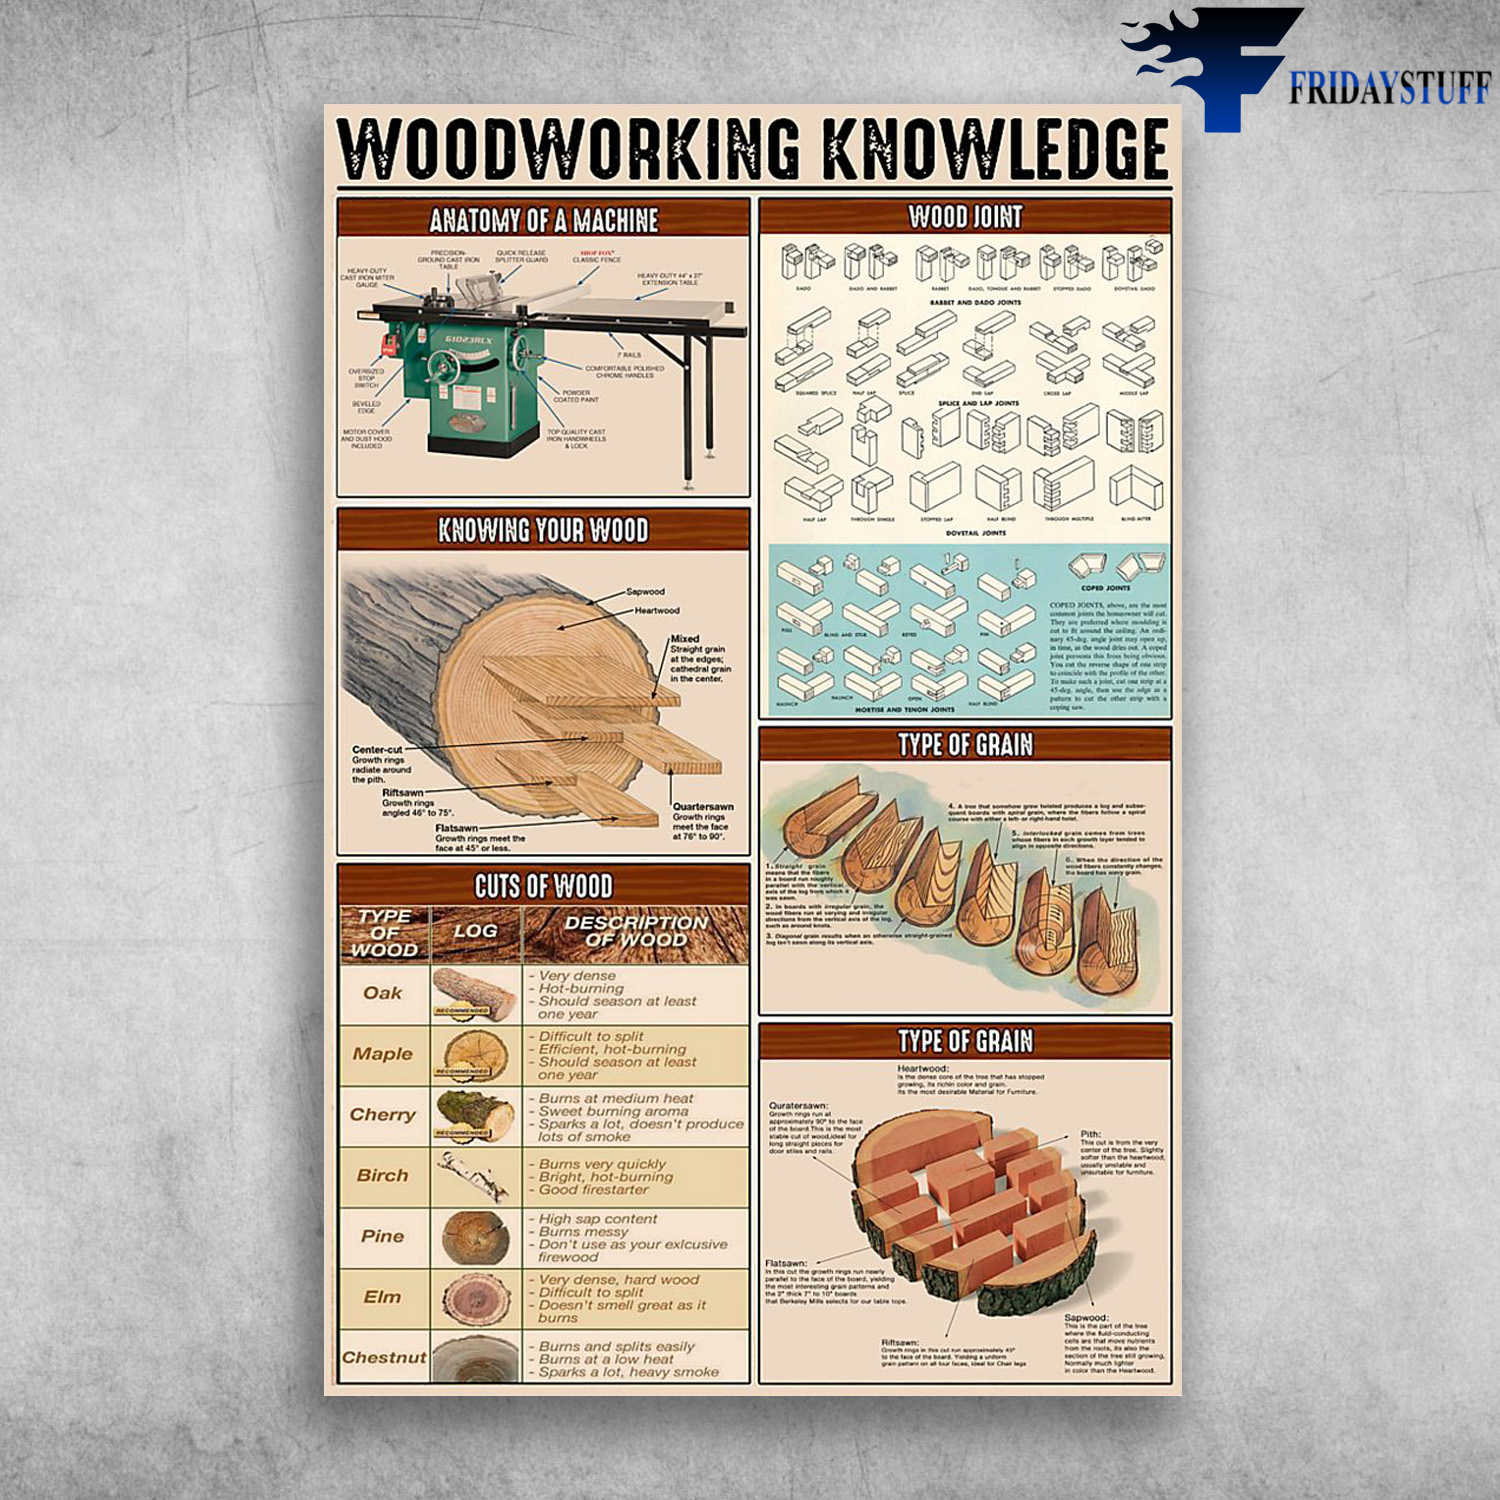 Carpenter Woodworking Knowledge - Anatomy Of A Machine, Wood Joint, Knowing Your Wood, Type Of Grain, Cuts Of Wood